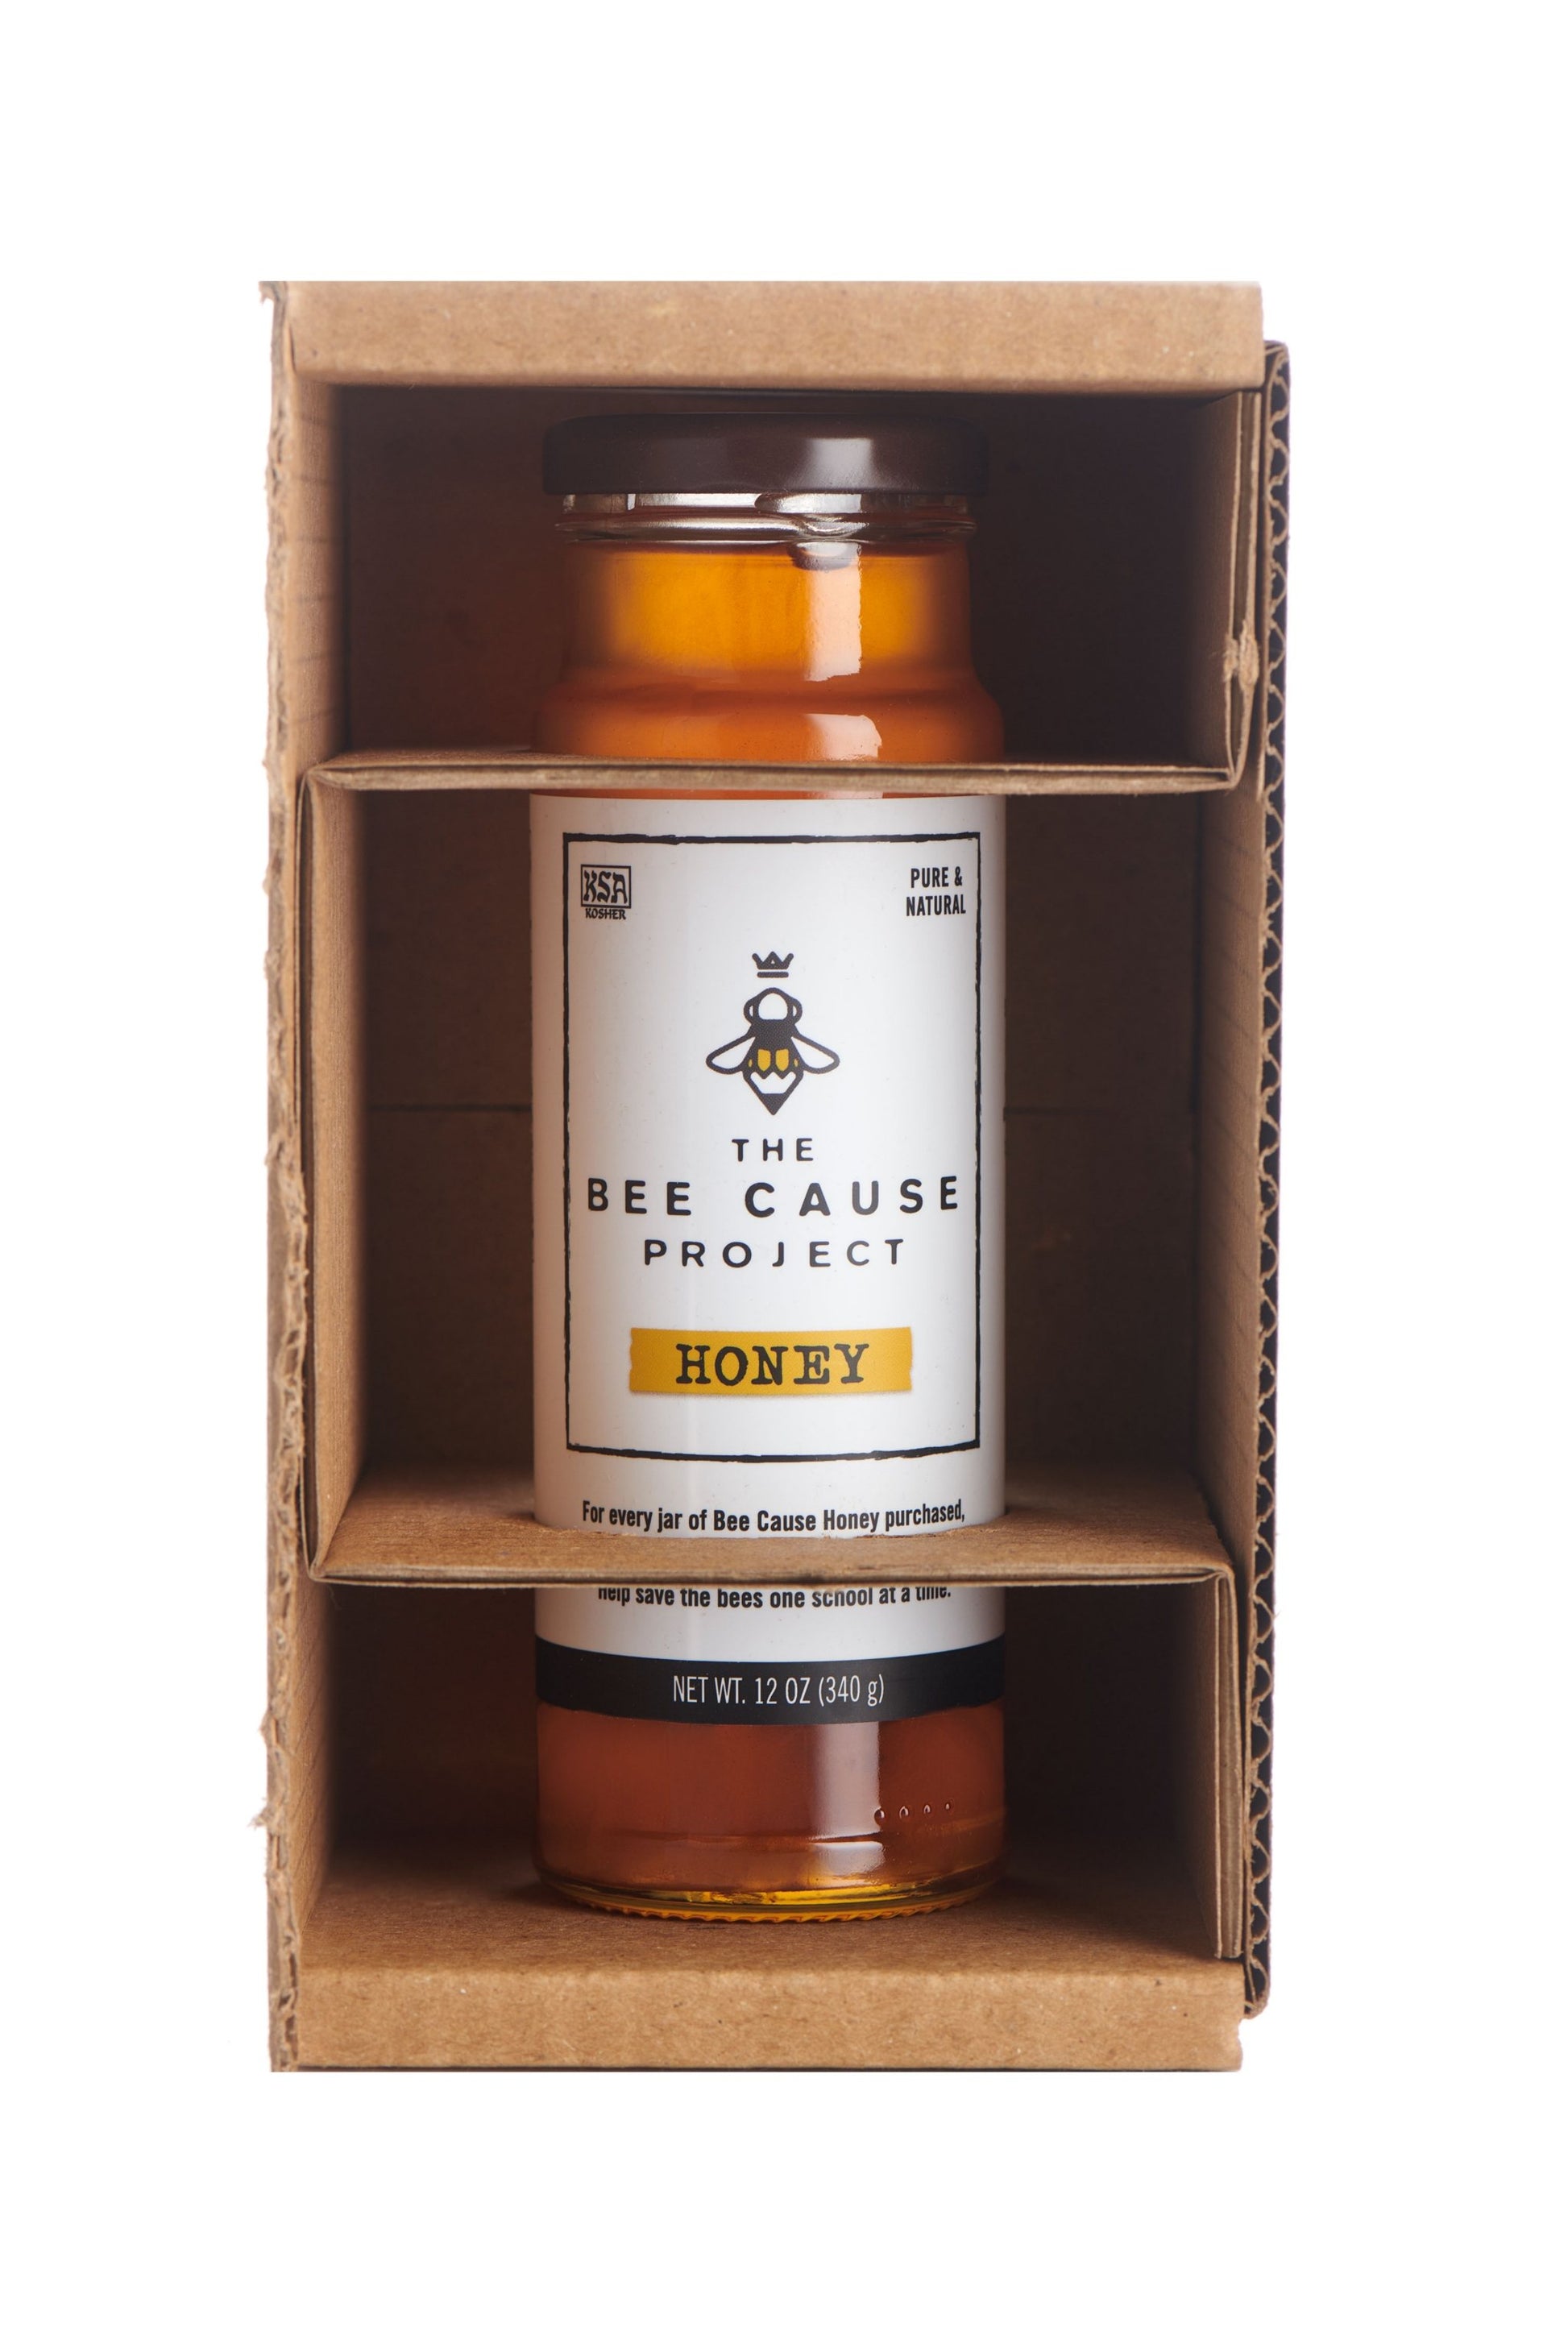 The Bee Cause Project Honey 12 oz. tower in gift box with Savannah Bee logo.